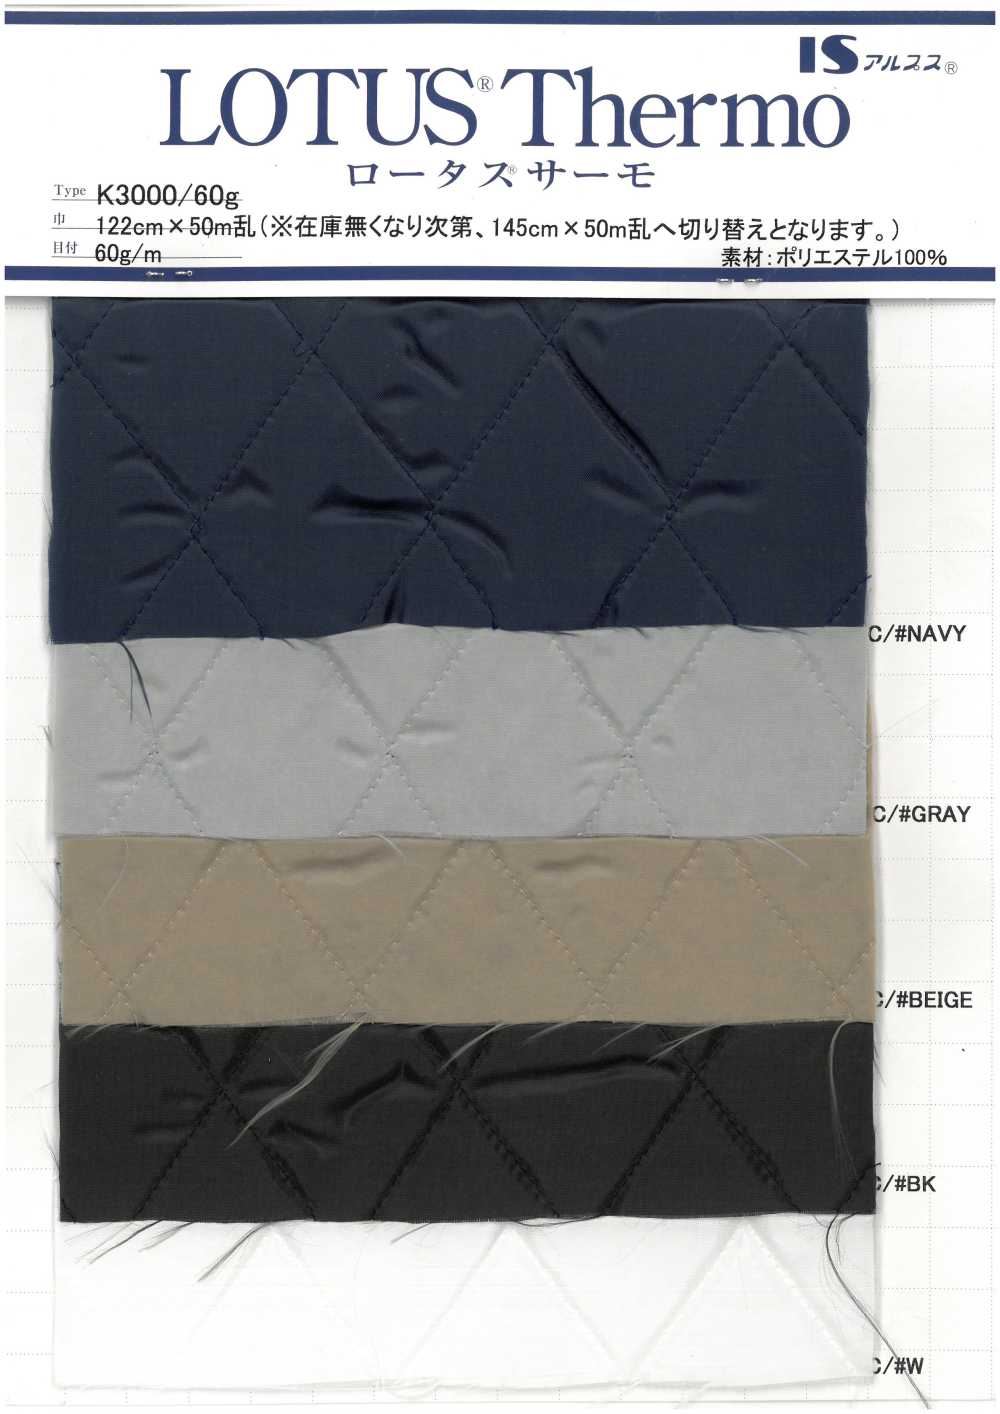 K3000 Lotus (R) Thermo Quilted Lining IWASAKI